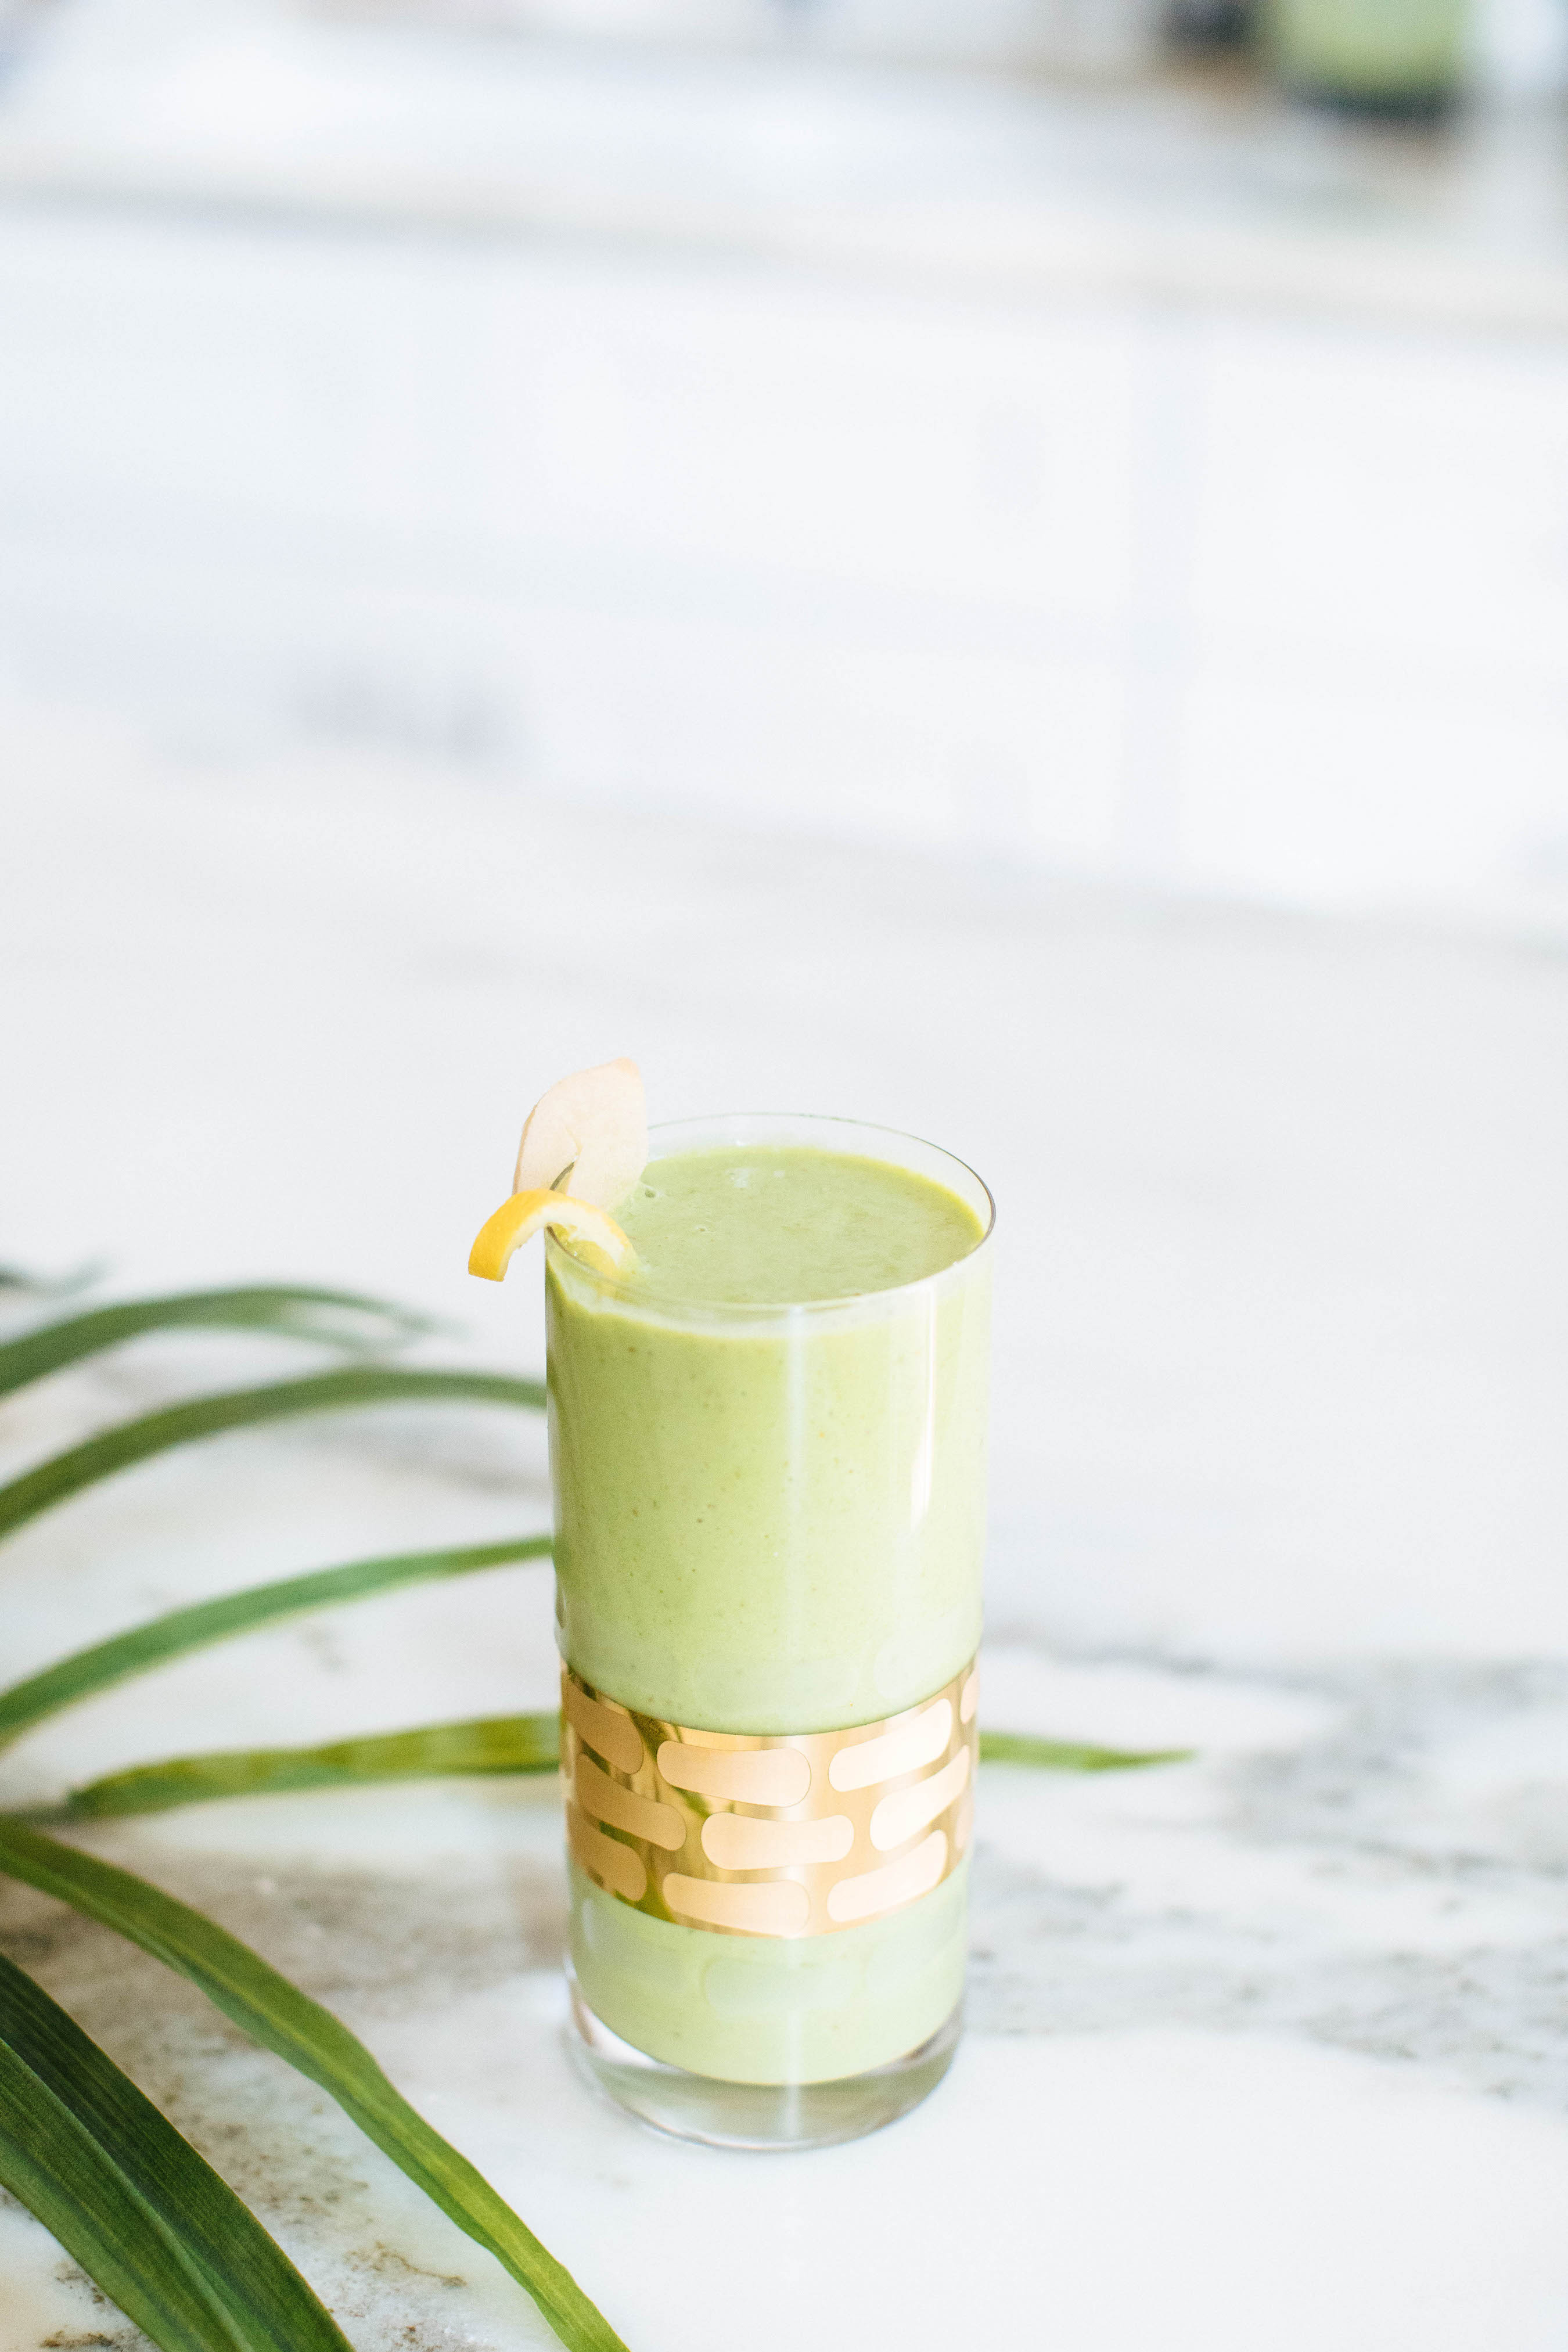 5 Minute Spinach Smoothie | Nutrition Stripped